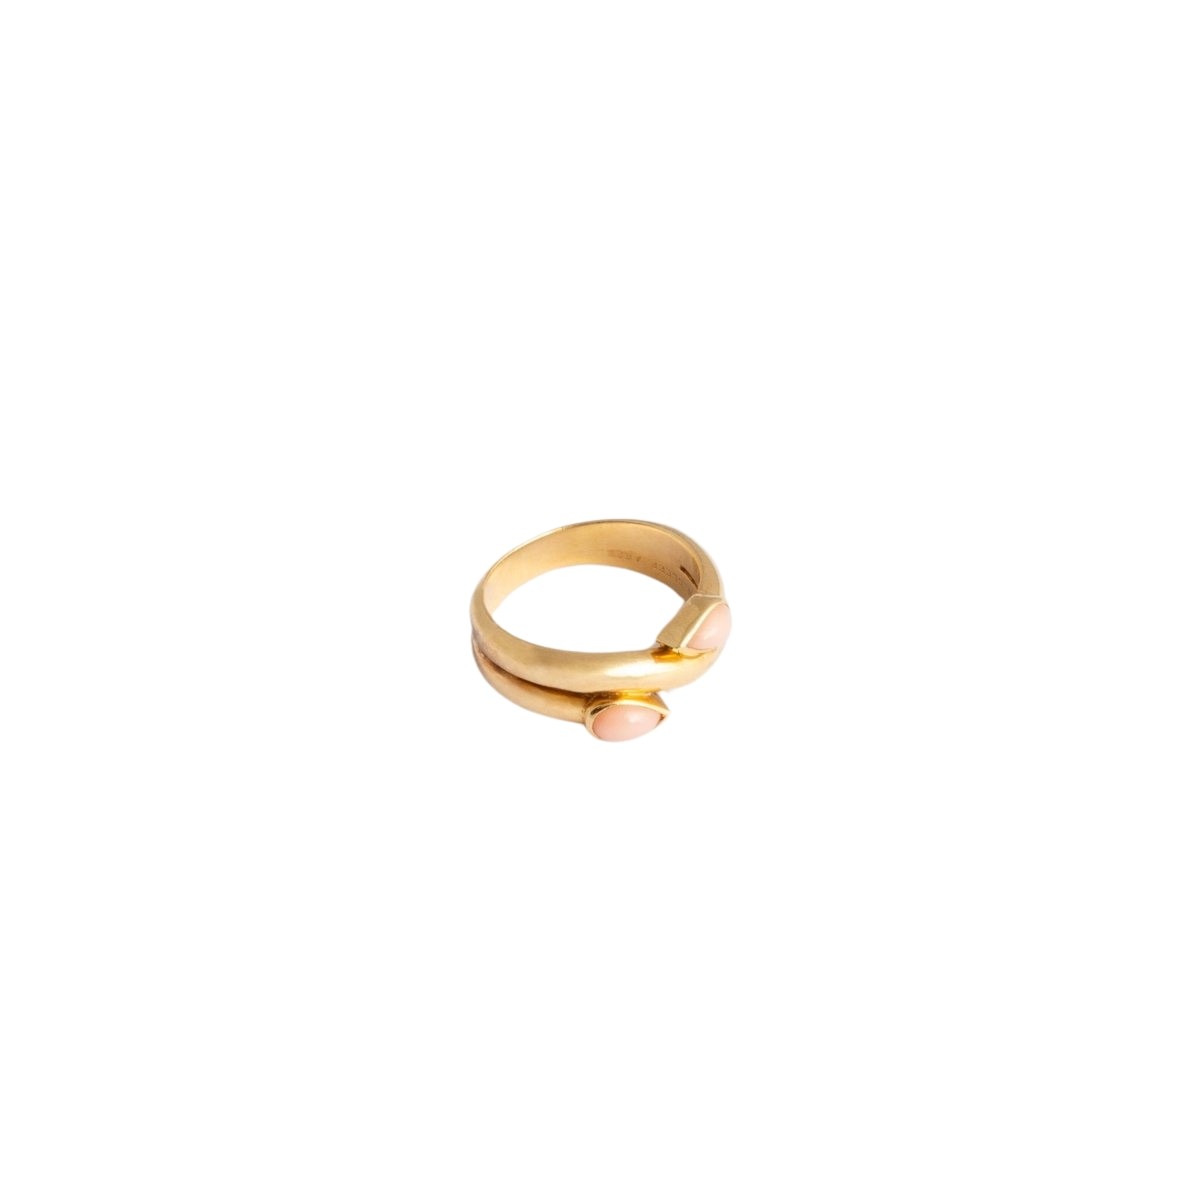 VAN CLEEF & ARPELS Cocktail ring in yellow gold, coral and pearls